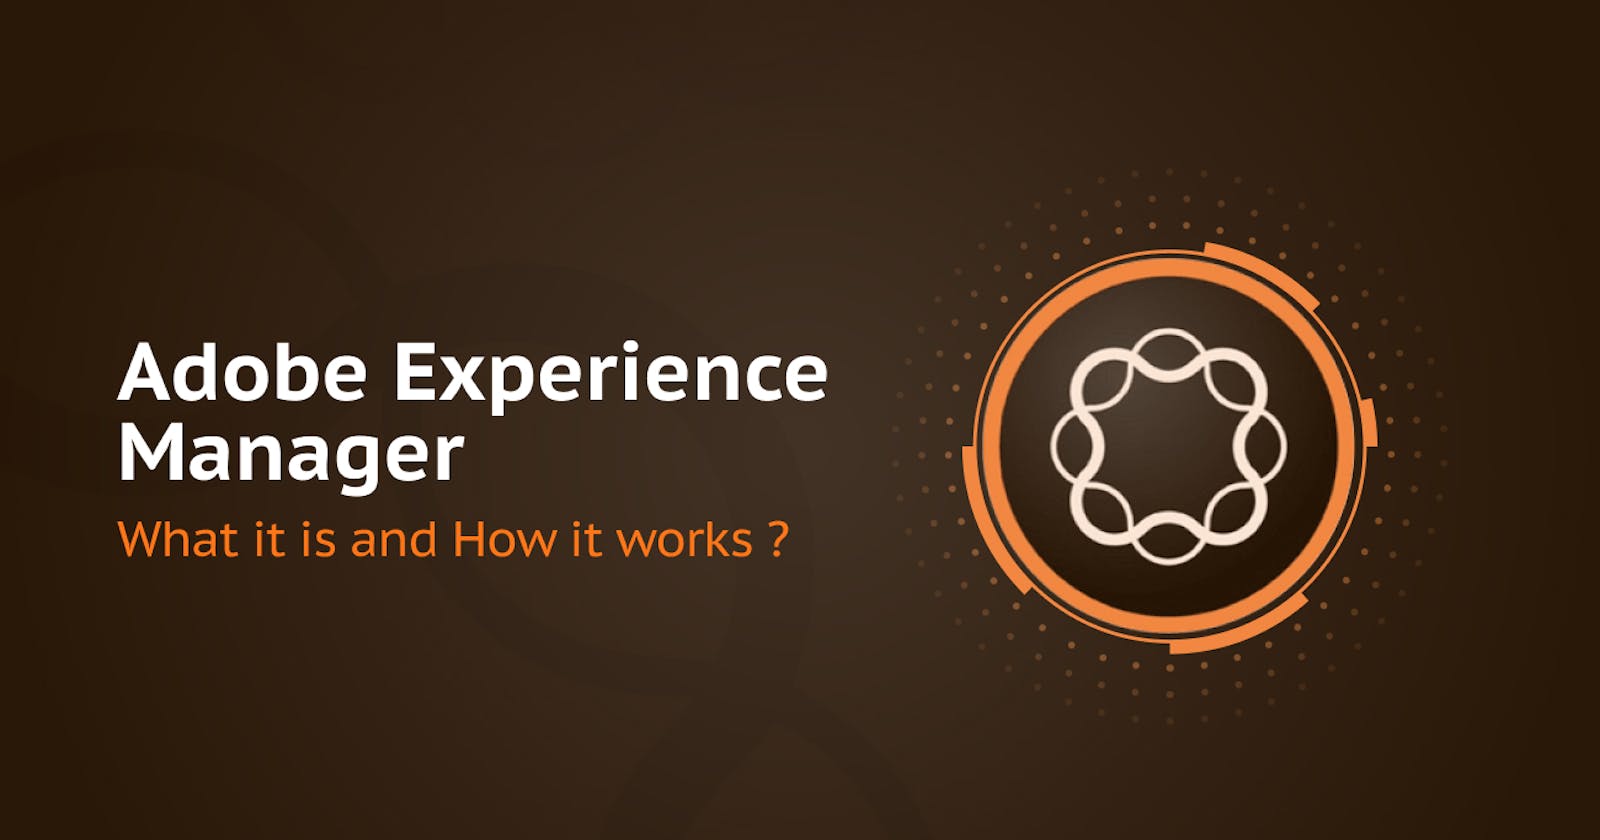 Adobe Experience Manager — What it is and How it Works ?